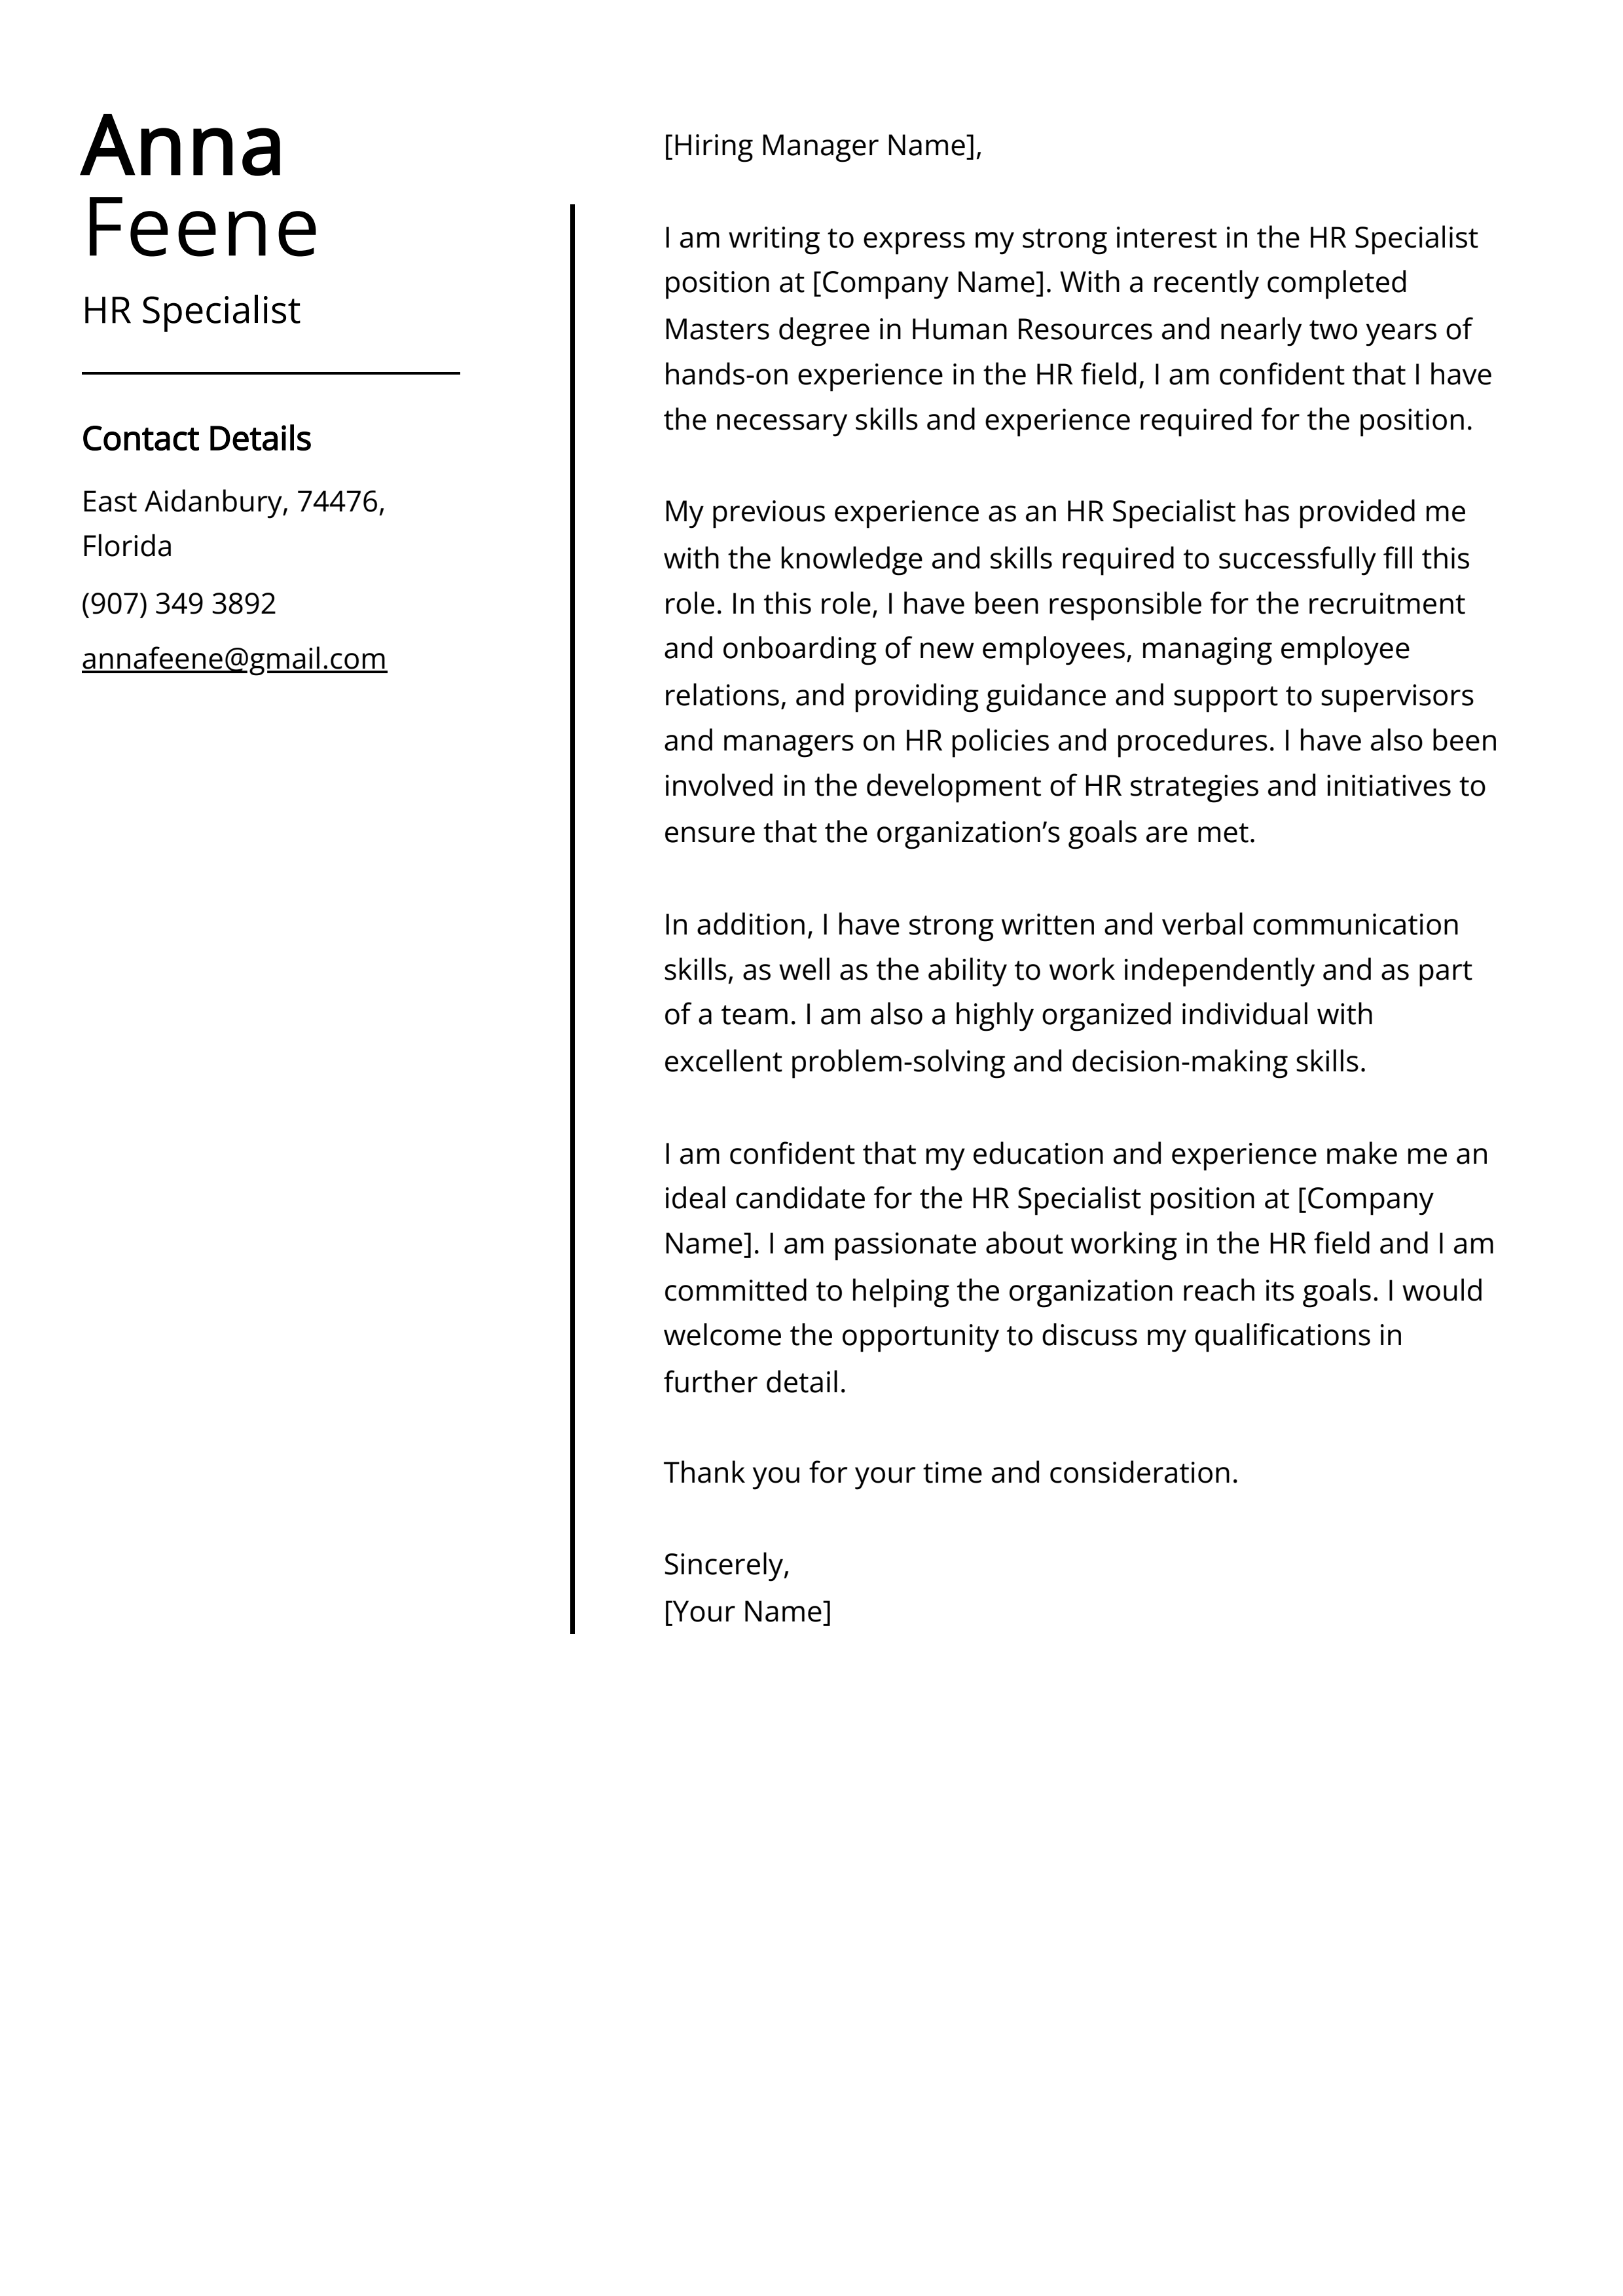 HR Specialist Cover Letter Example